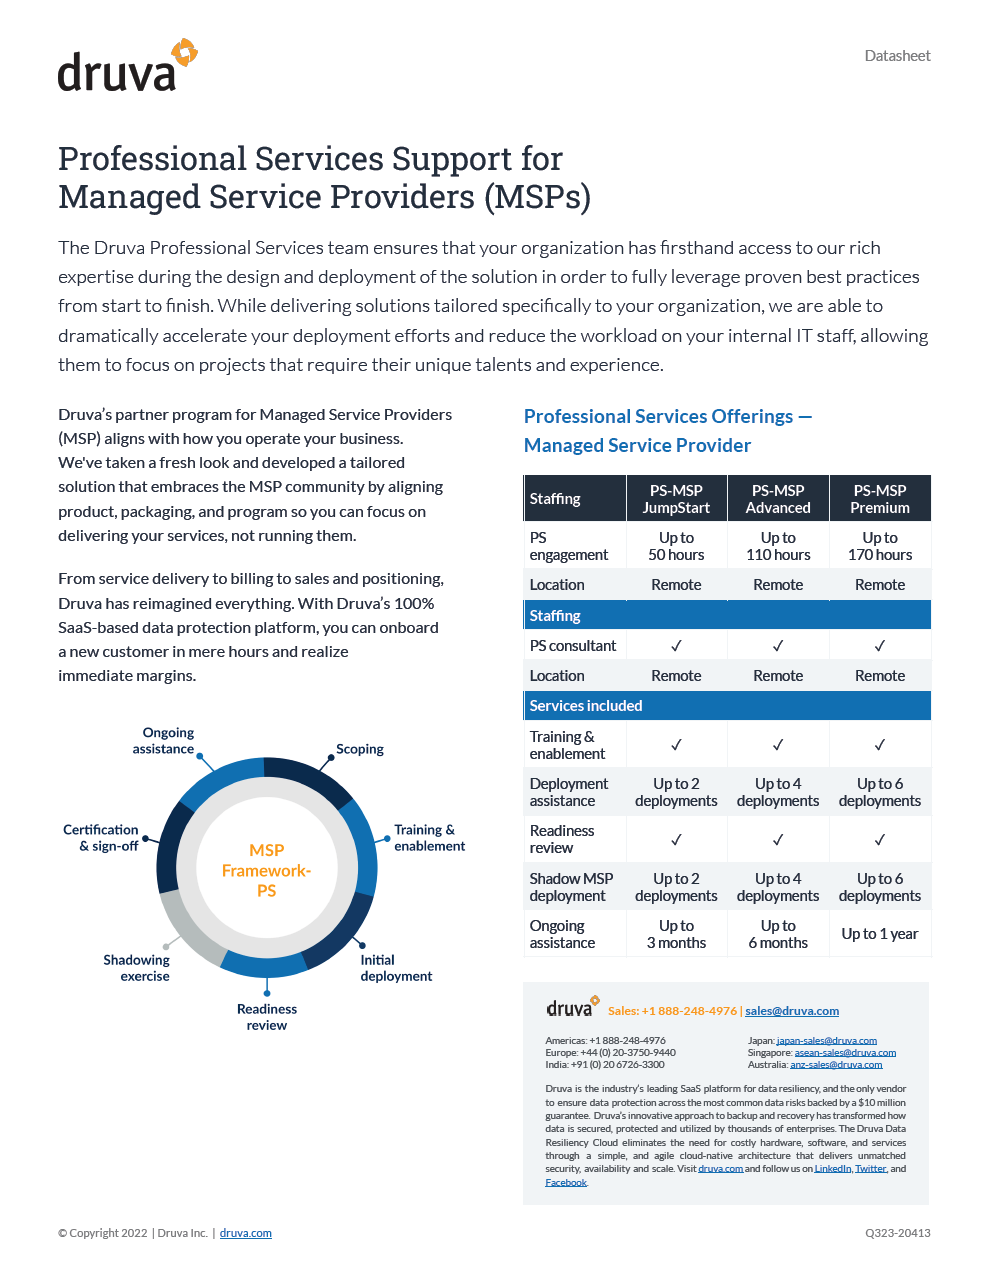 Professional Services Support for Managed Service Providers (MSPs)